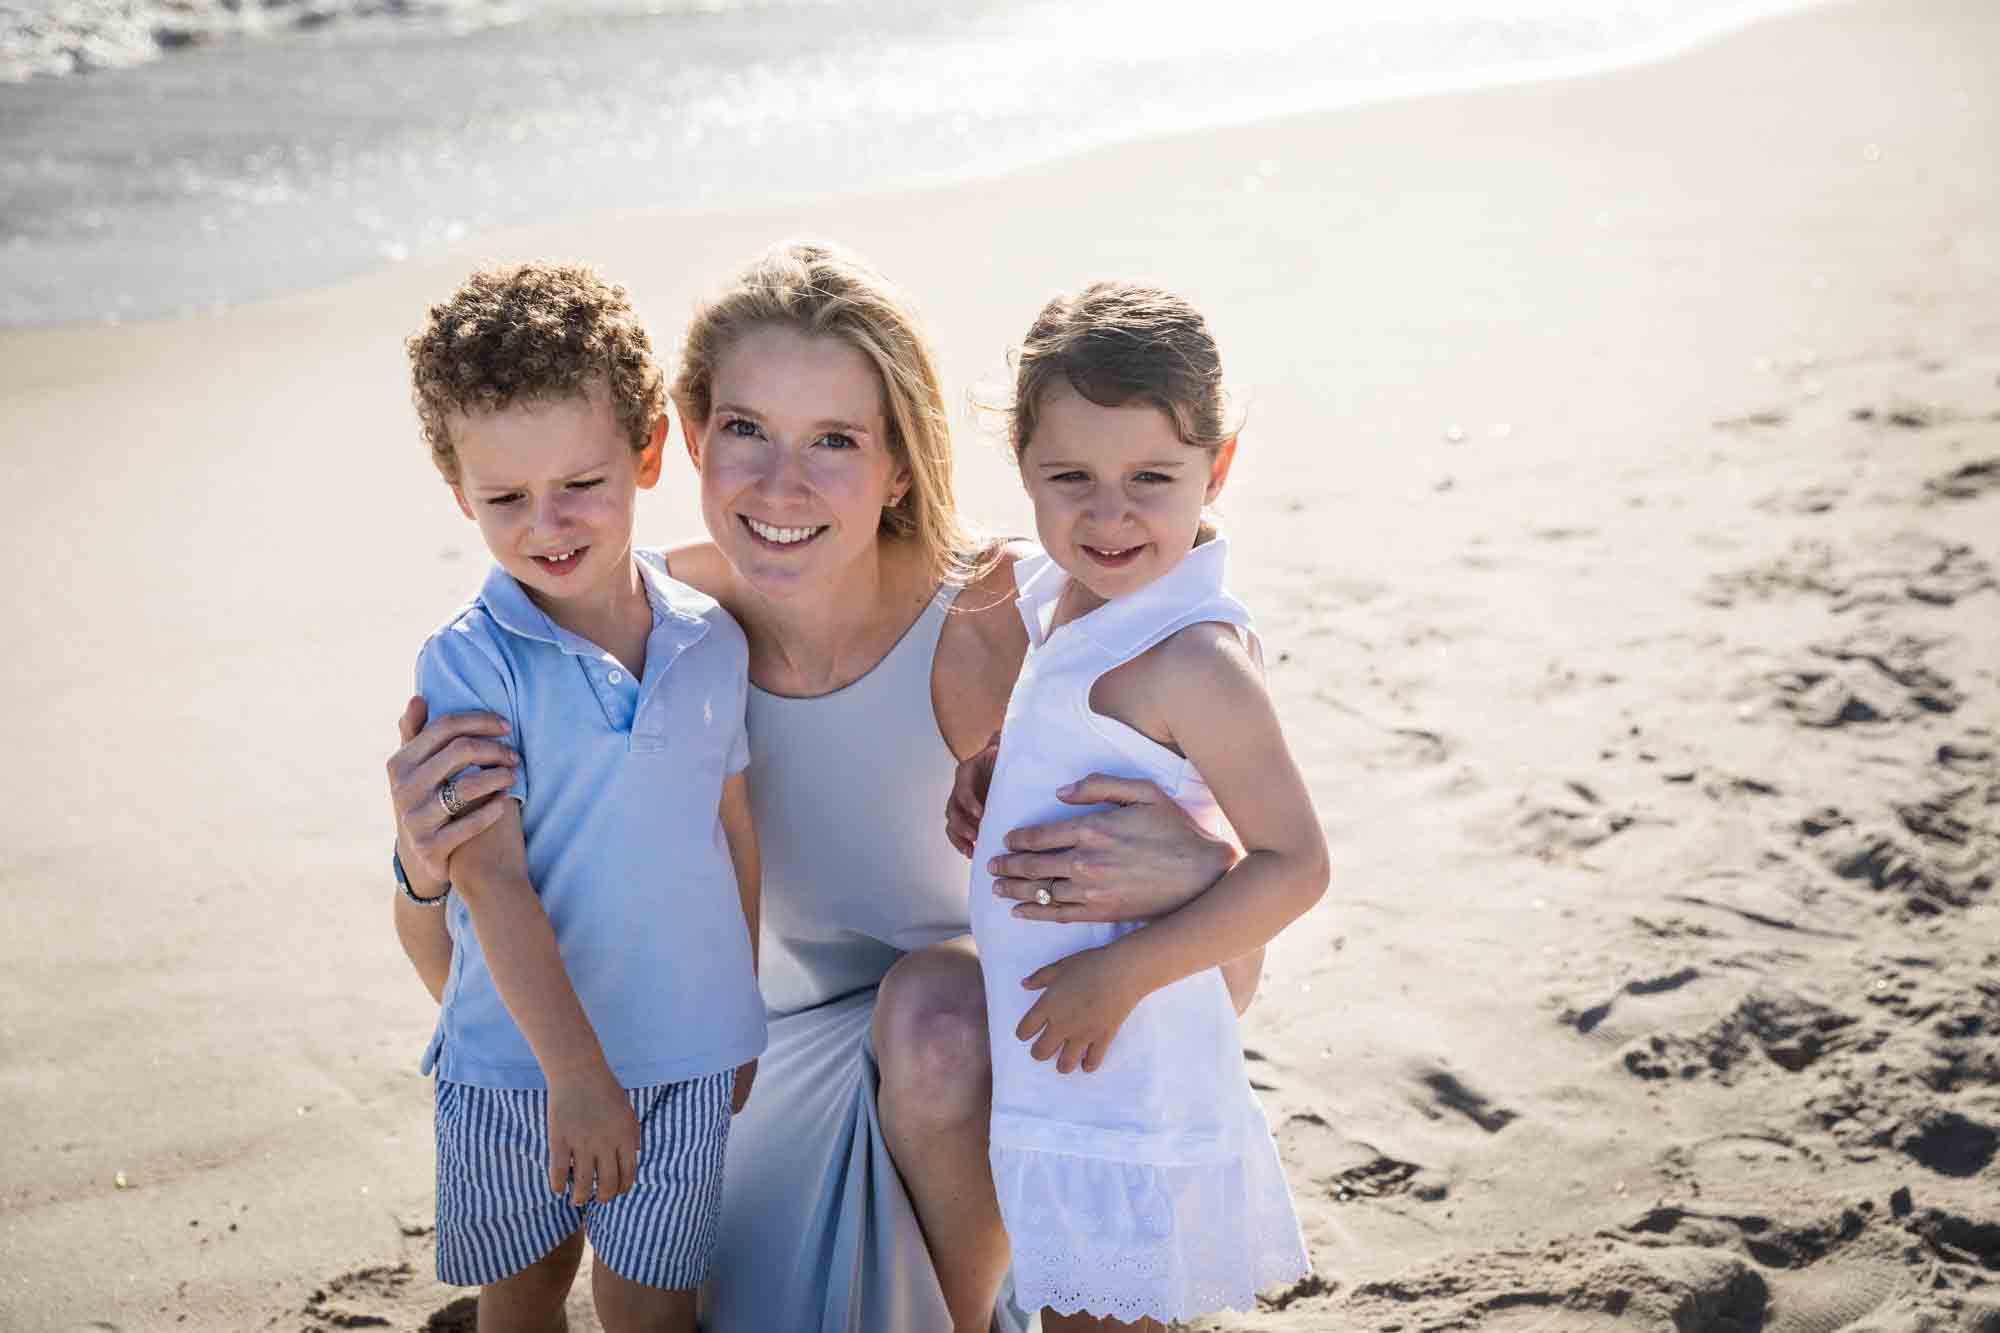 Mother with two small children on a beach for an article on beach family portrait tips